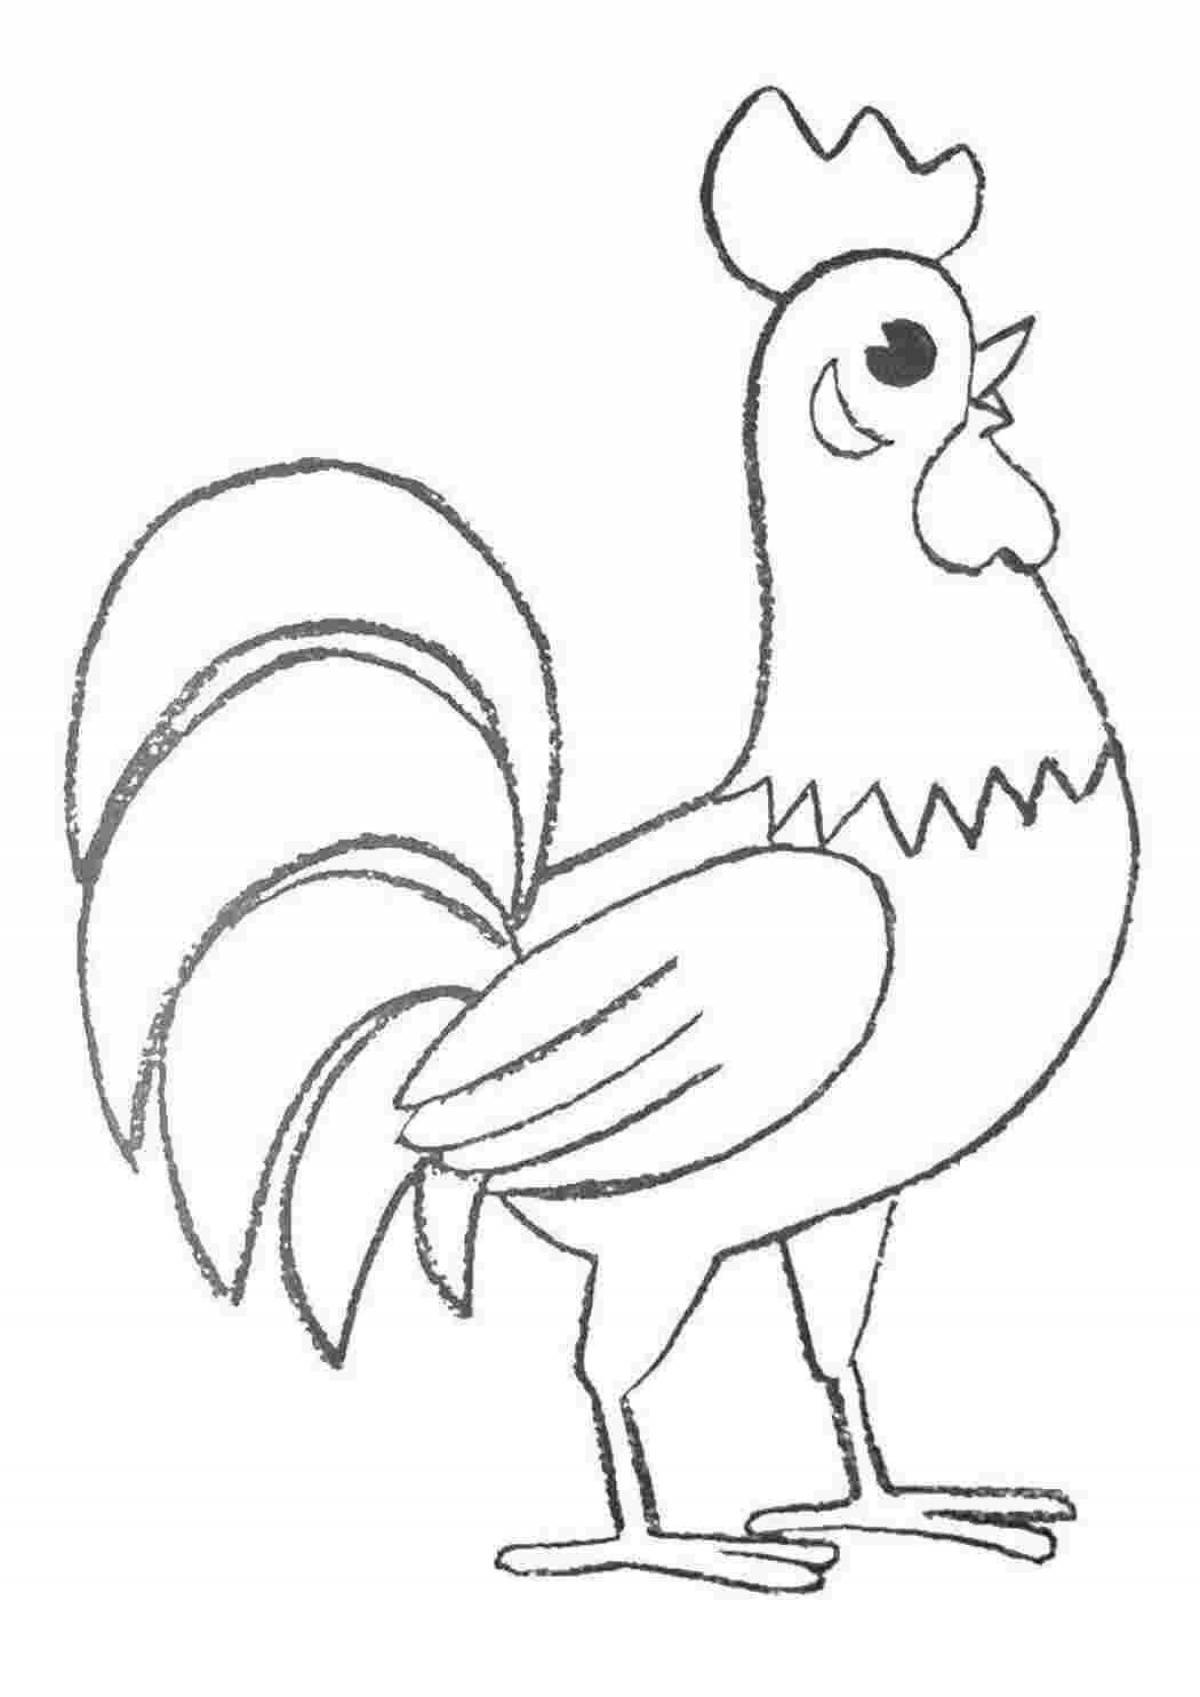 Coloring book nice rooster for children 3-4 years old